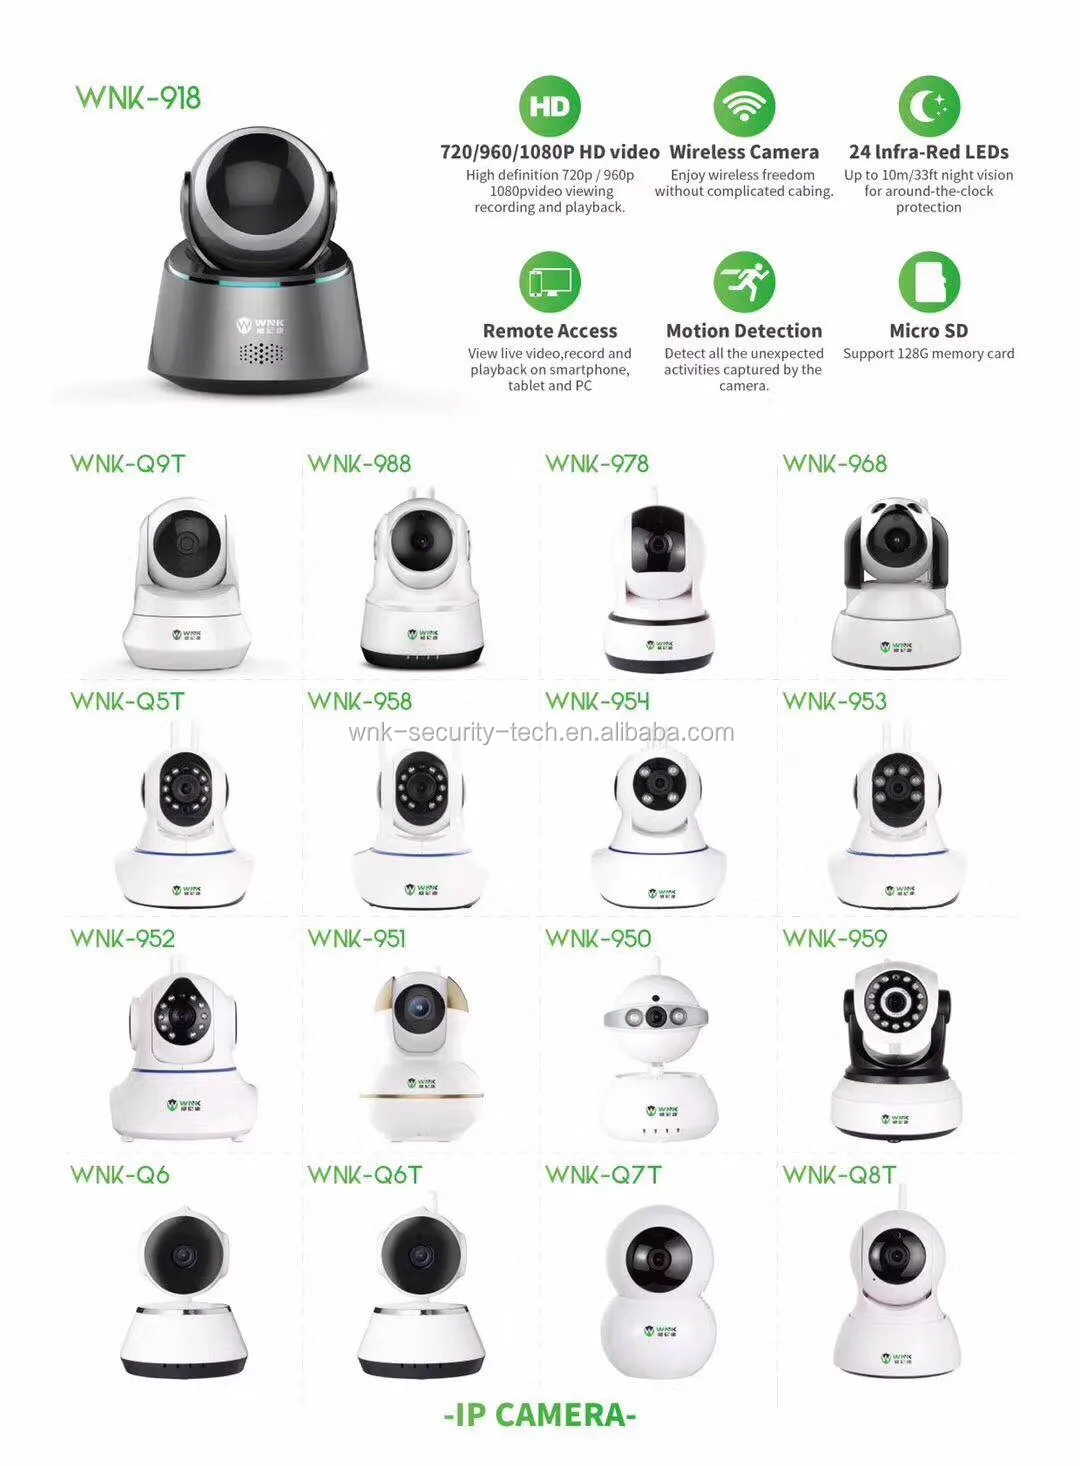 4 CH Wireless Security Camera System with HD Monitor NVR and Home Surveillance  Cameras - CuteDigi